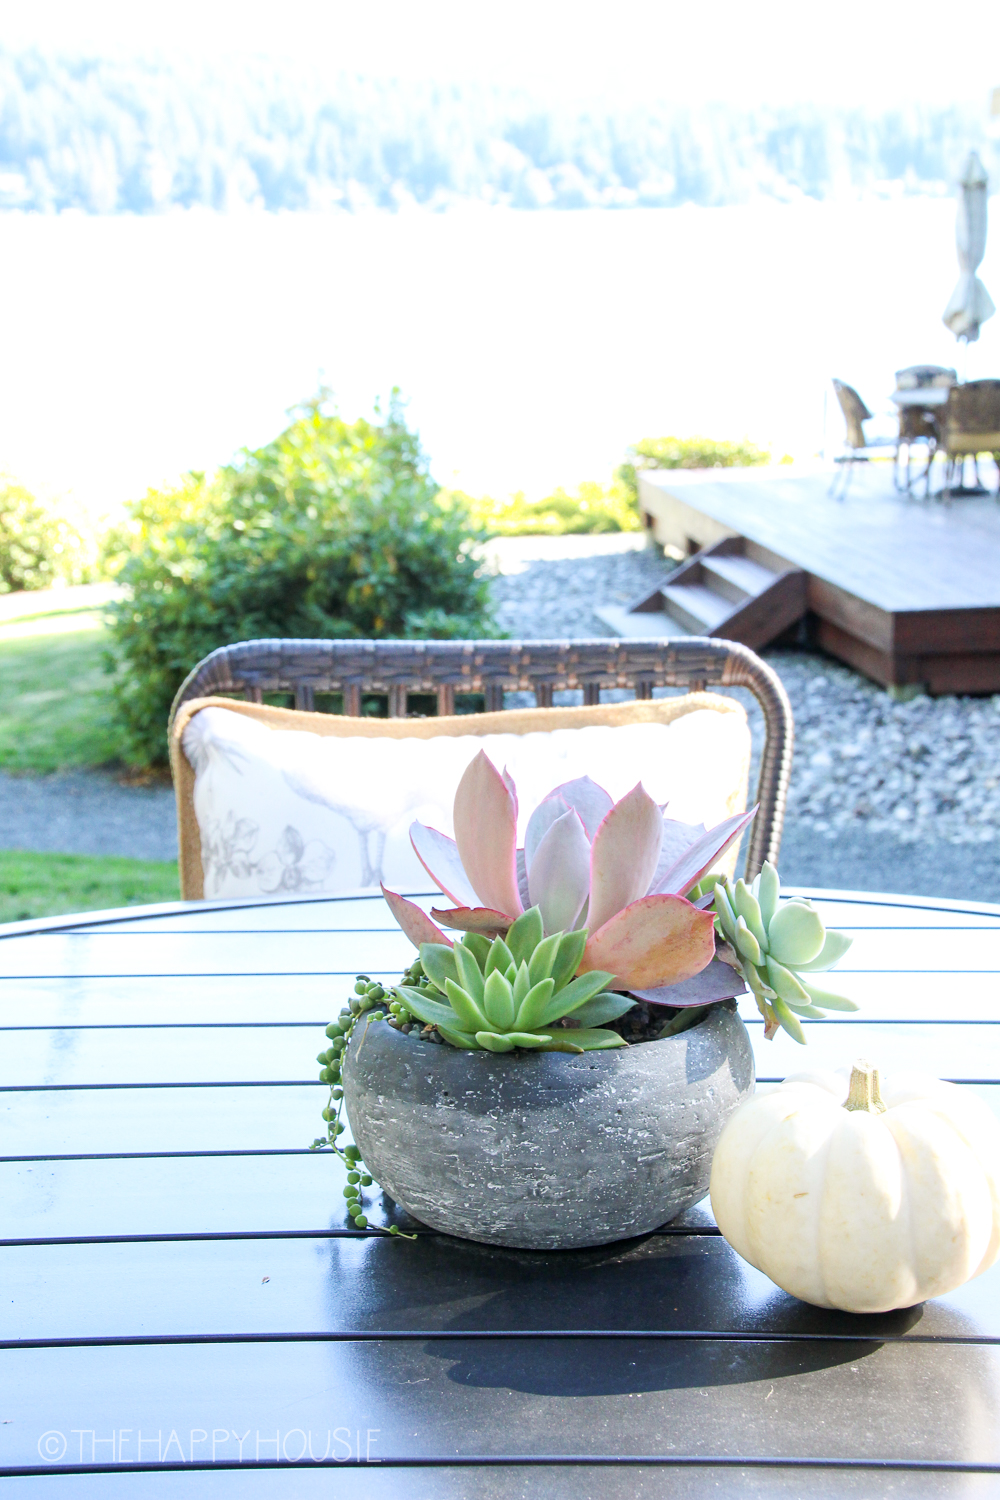 There is a little planter with succulents a single white mini pumpkin on the round outdoor table.